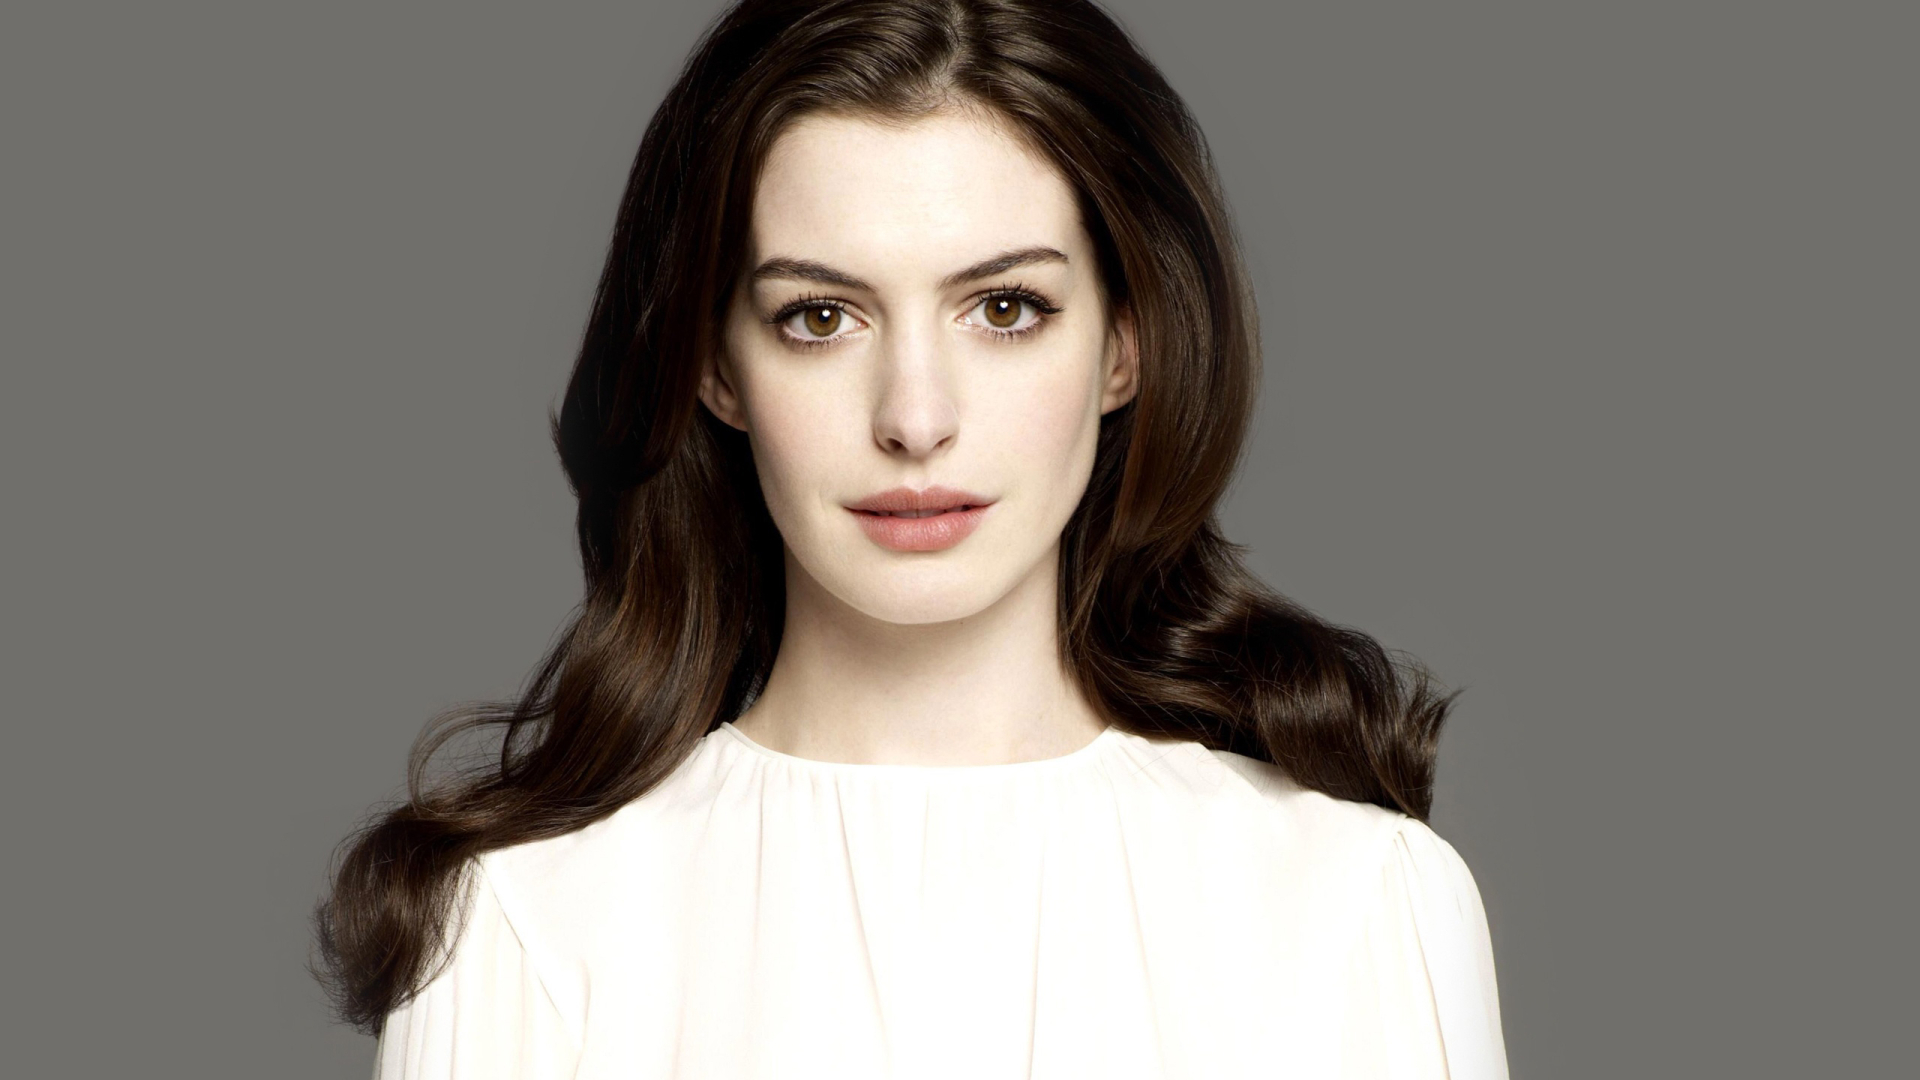 anne-hathaway-wallpaper@wallpaperpassion(1) | bhadup | Flickr